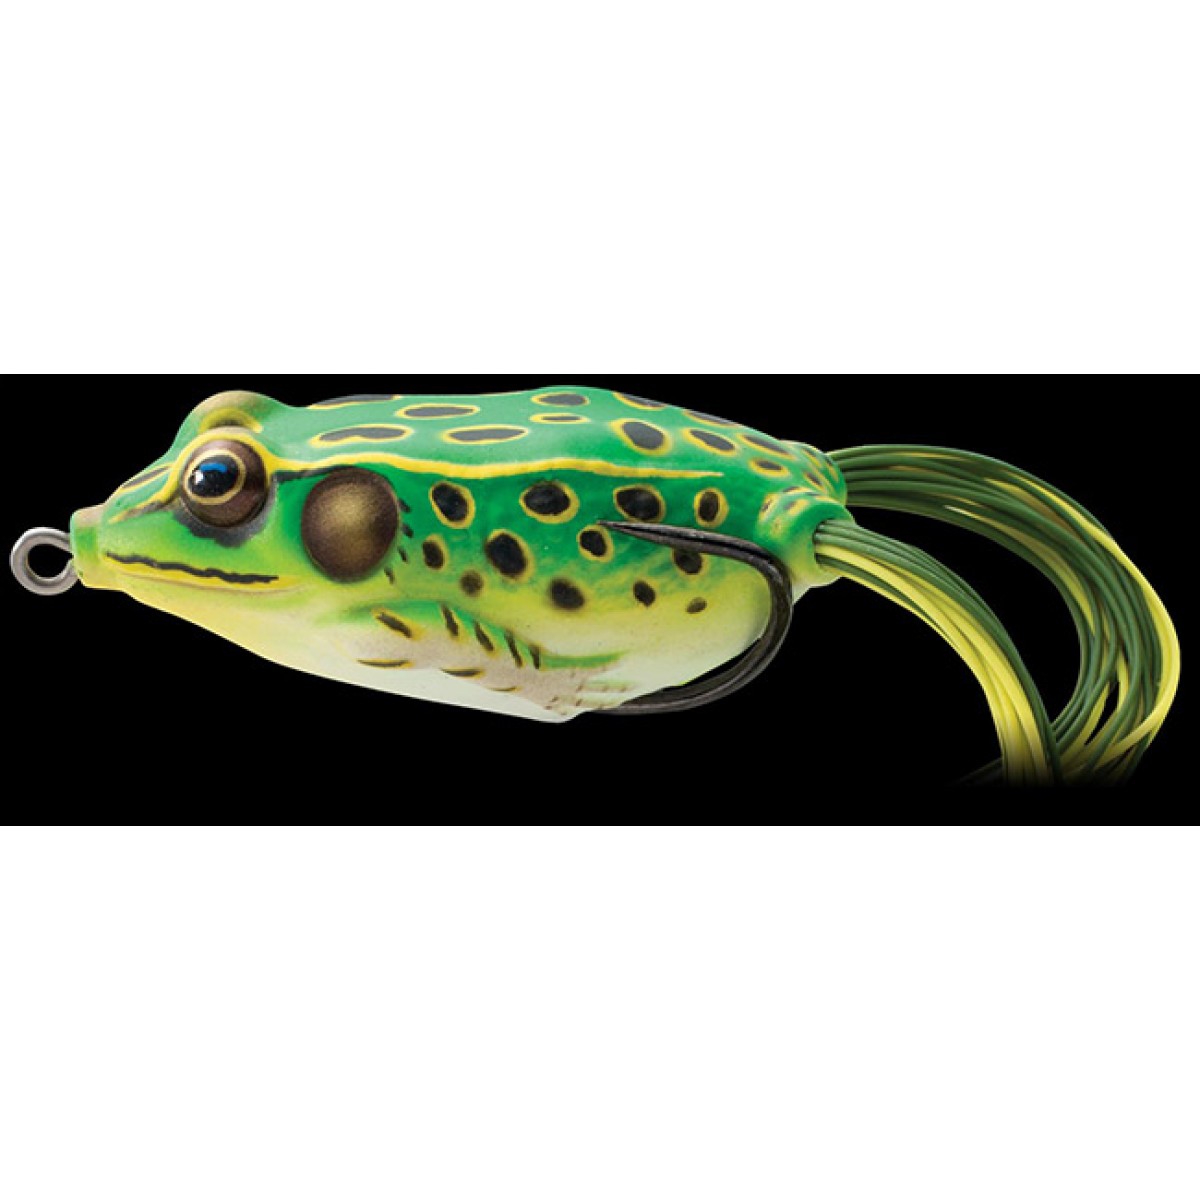 NEW Koppers Hollow Body Frog Floating 1-7/8" Yellow/Black FGH45T501 